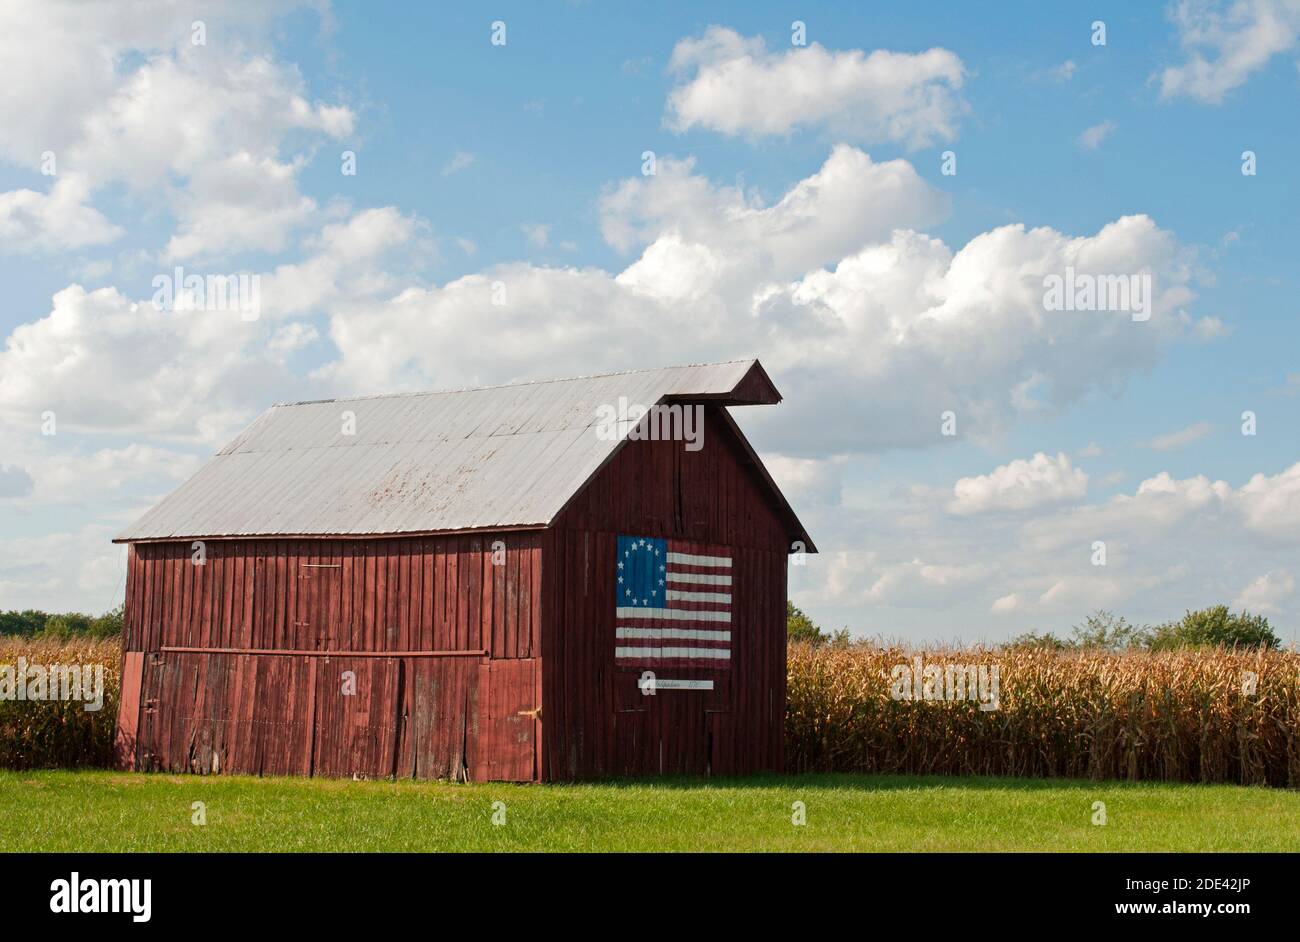 A wooden barn with a painting of the 13-star Betsy Ross flag (an early American flag design) stands near cornfields along old Route 66 in Nilwood, IL. Stock Photo